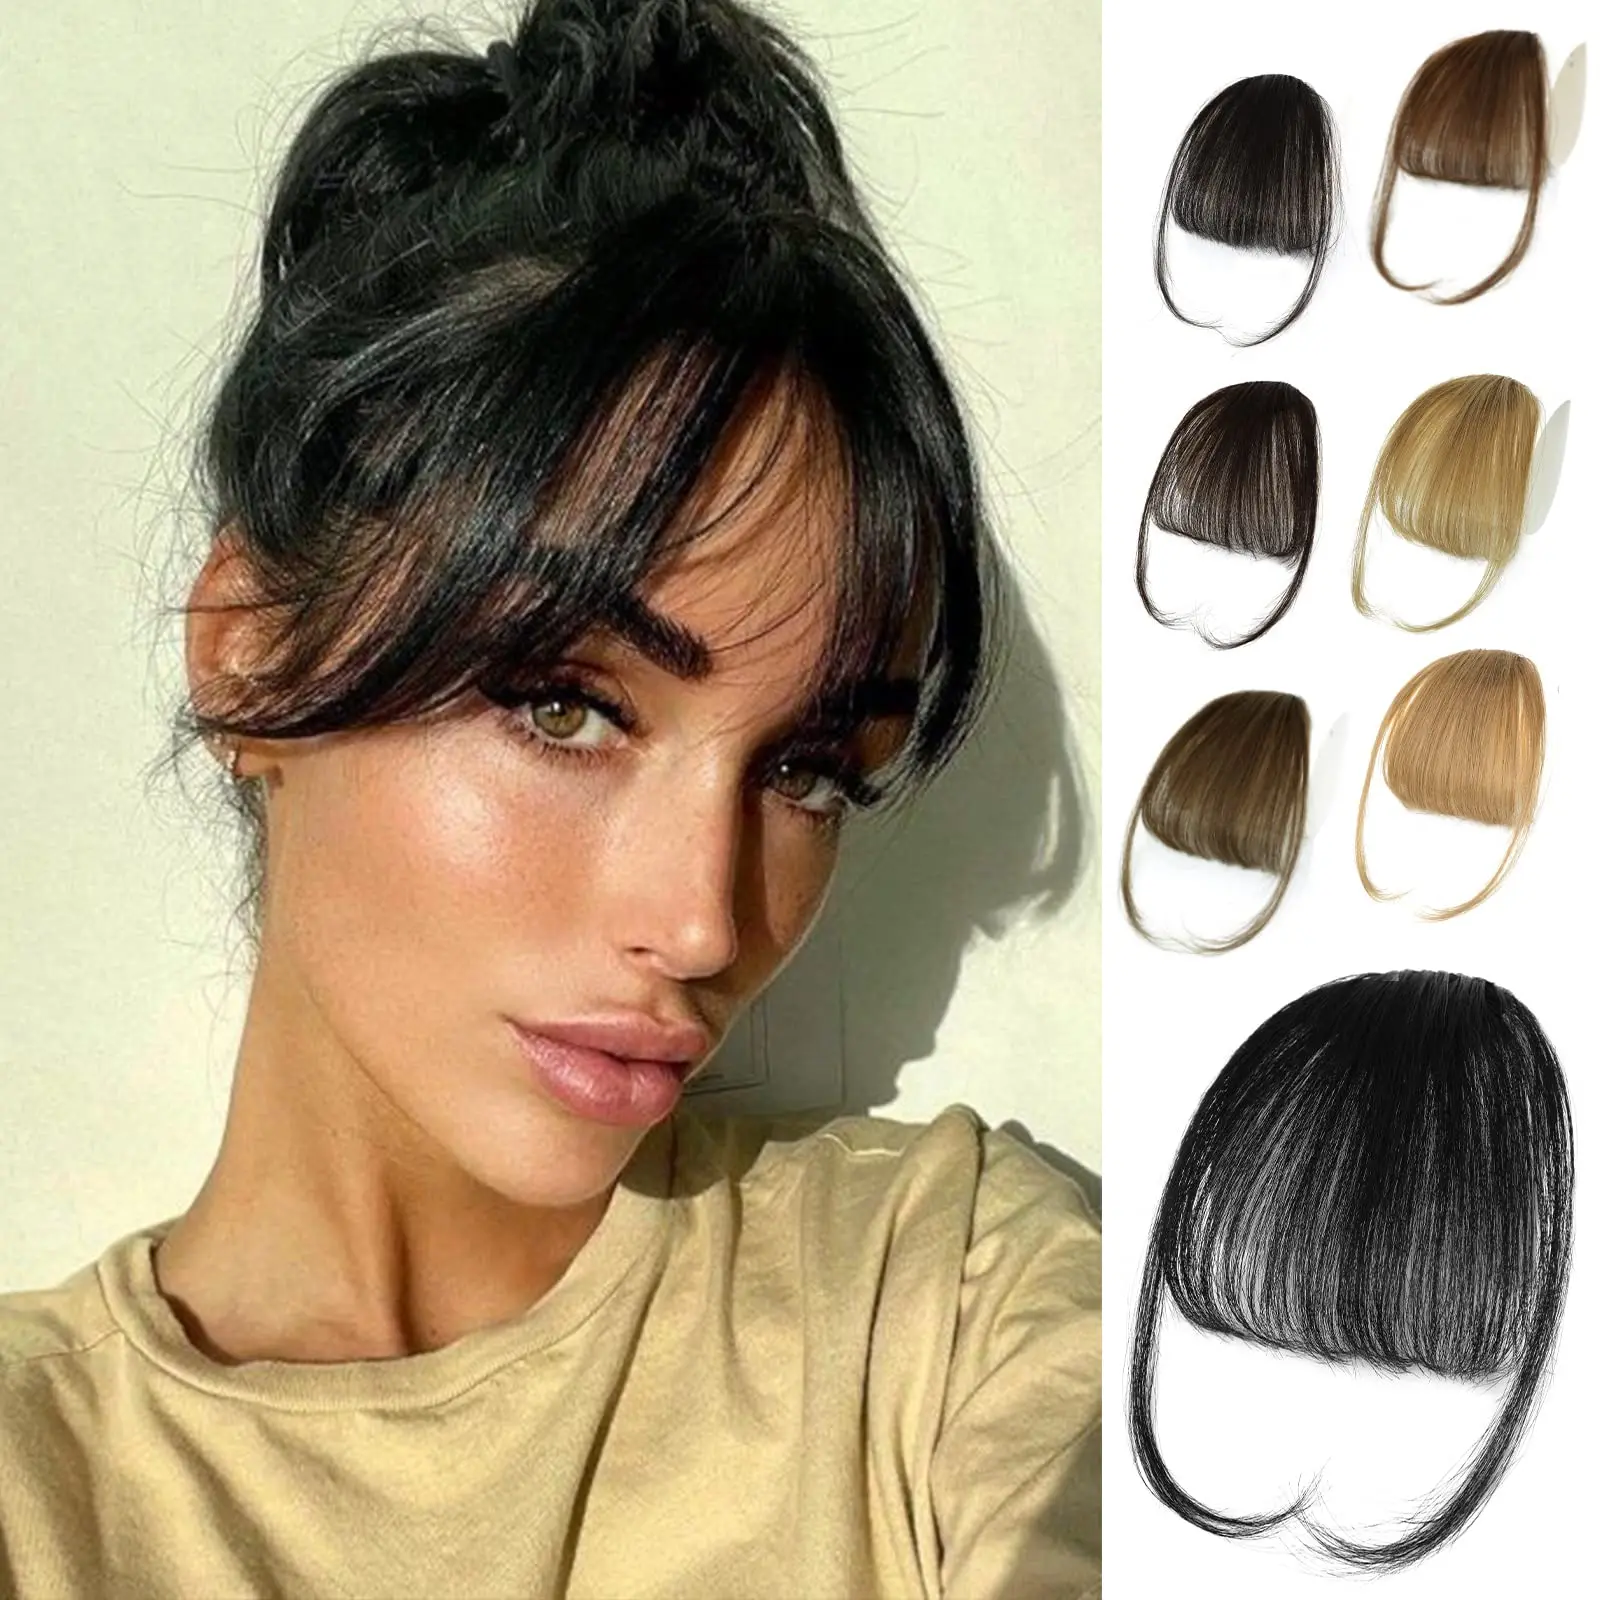 Bangs Hair Clip 100% Real Human Hair Clip in Bangs Extensions Wispy Bangs Fringe with Temples Hairpieces for Women